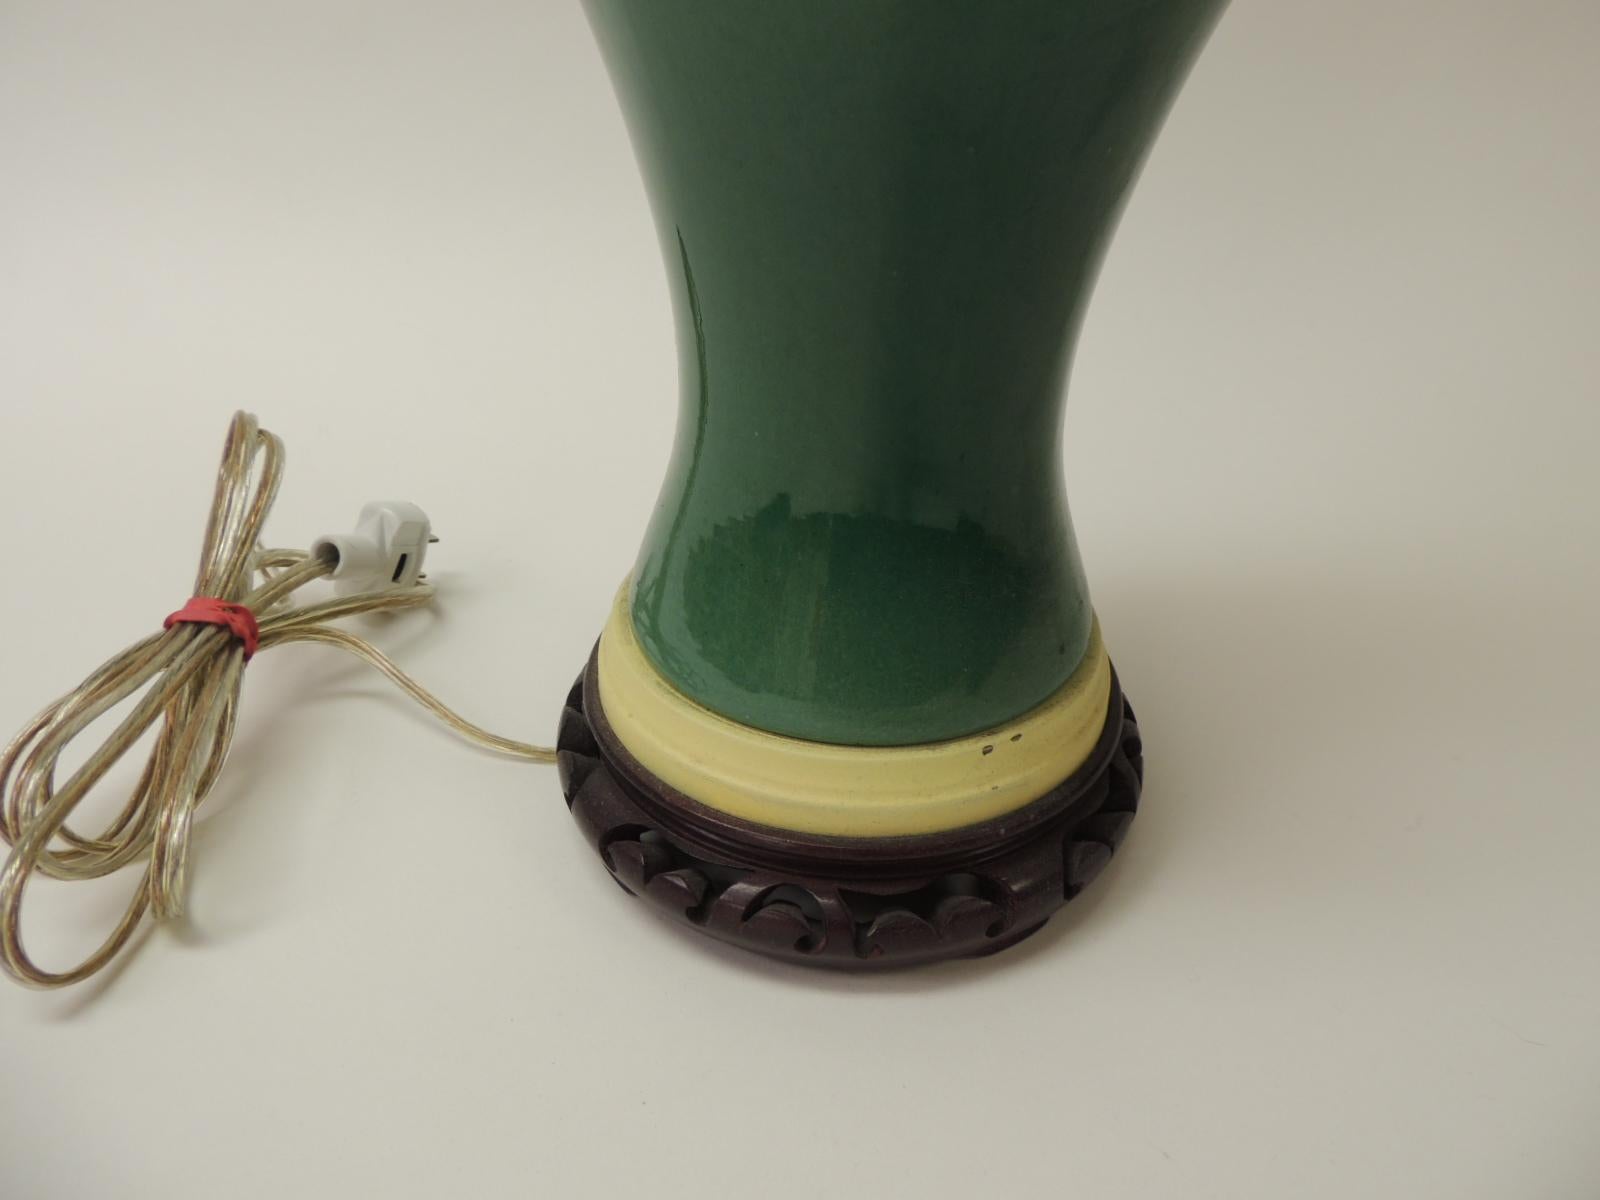 Chinese Export Vintage Green Ceramic Lamp with Brass Fittings